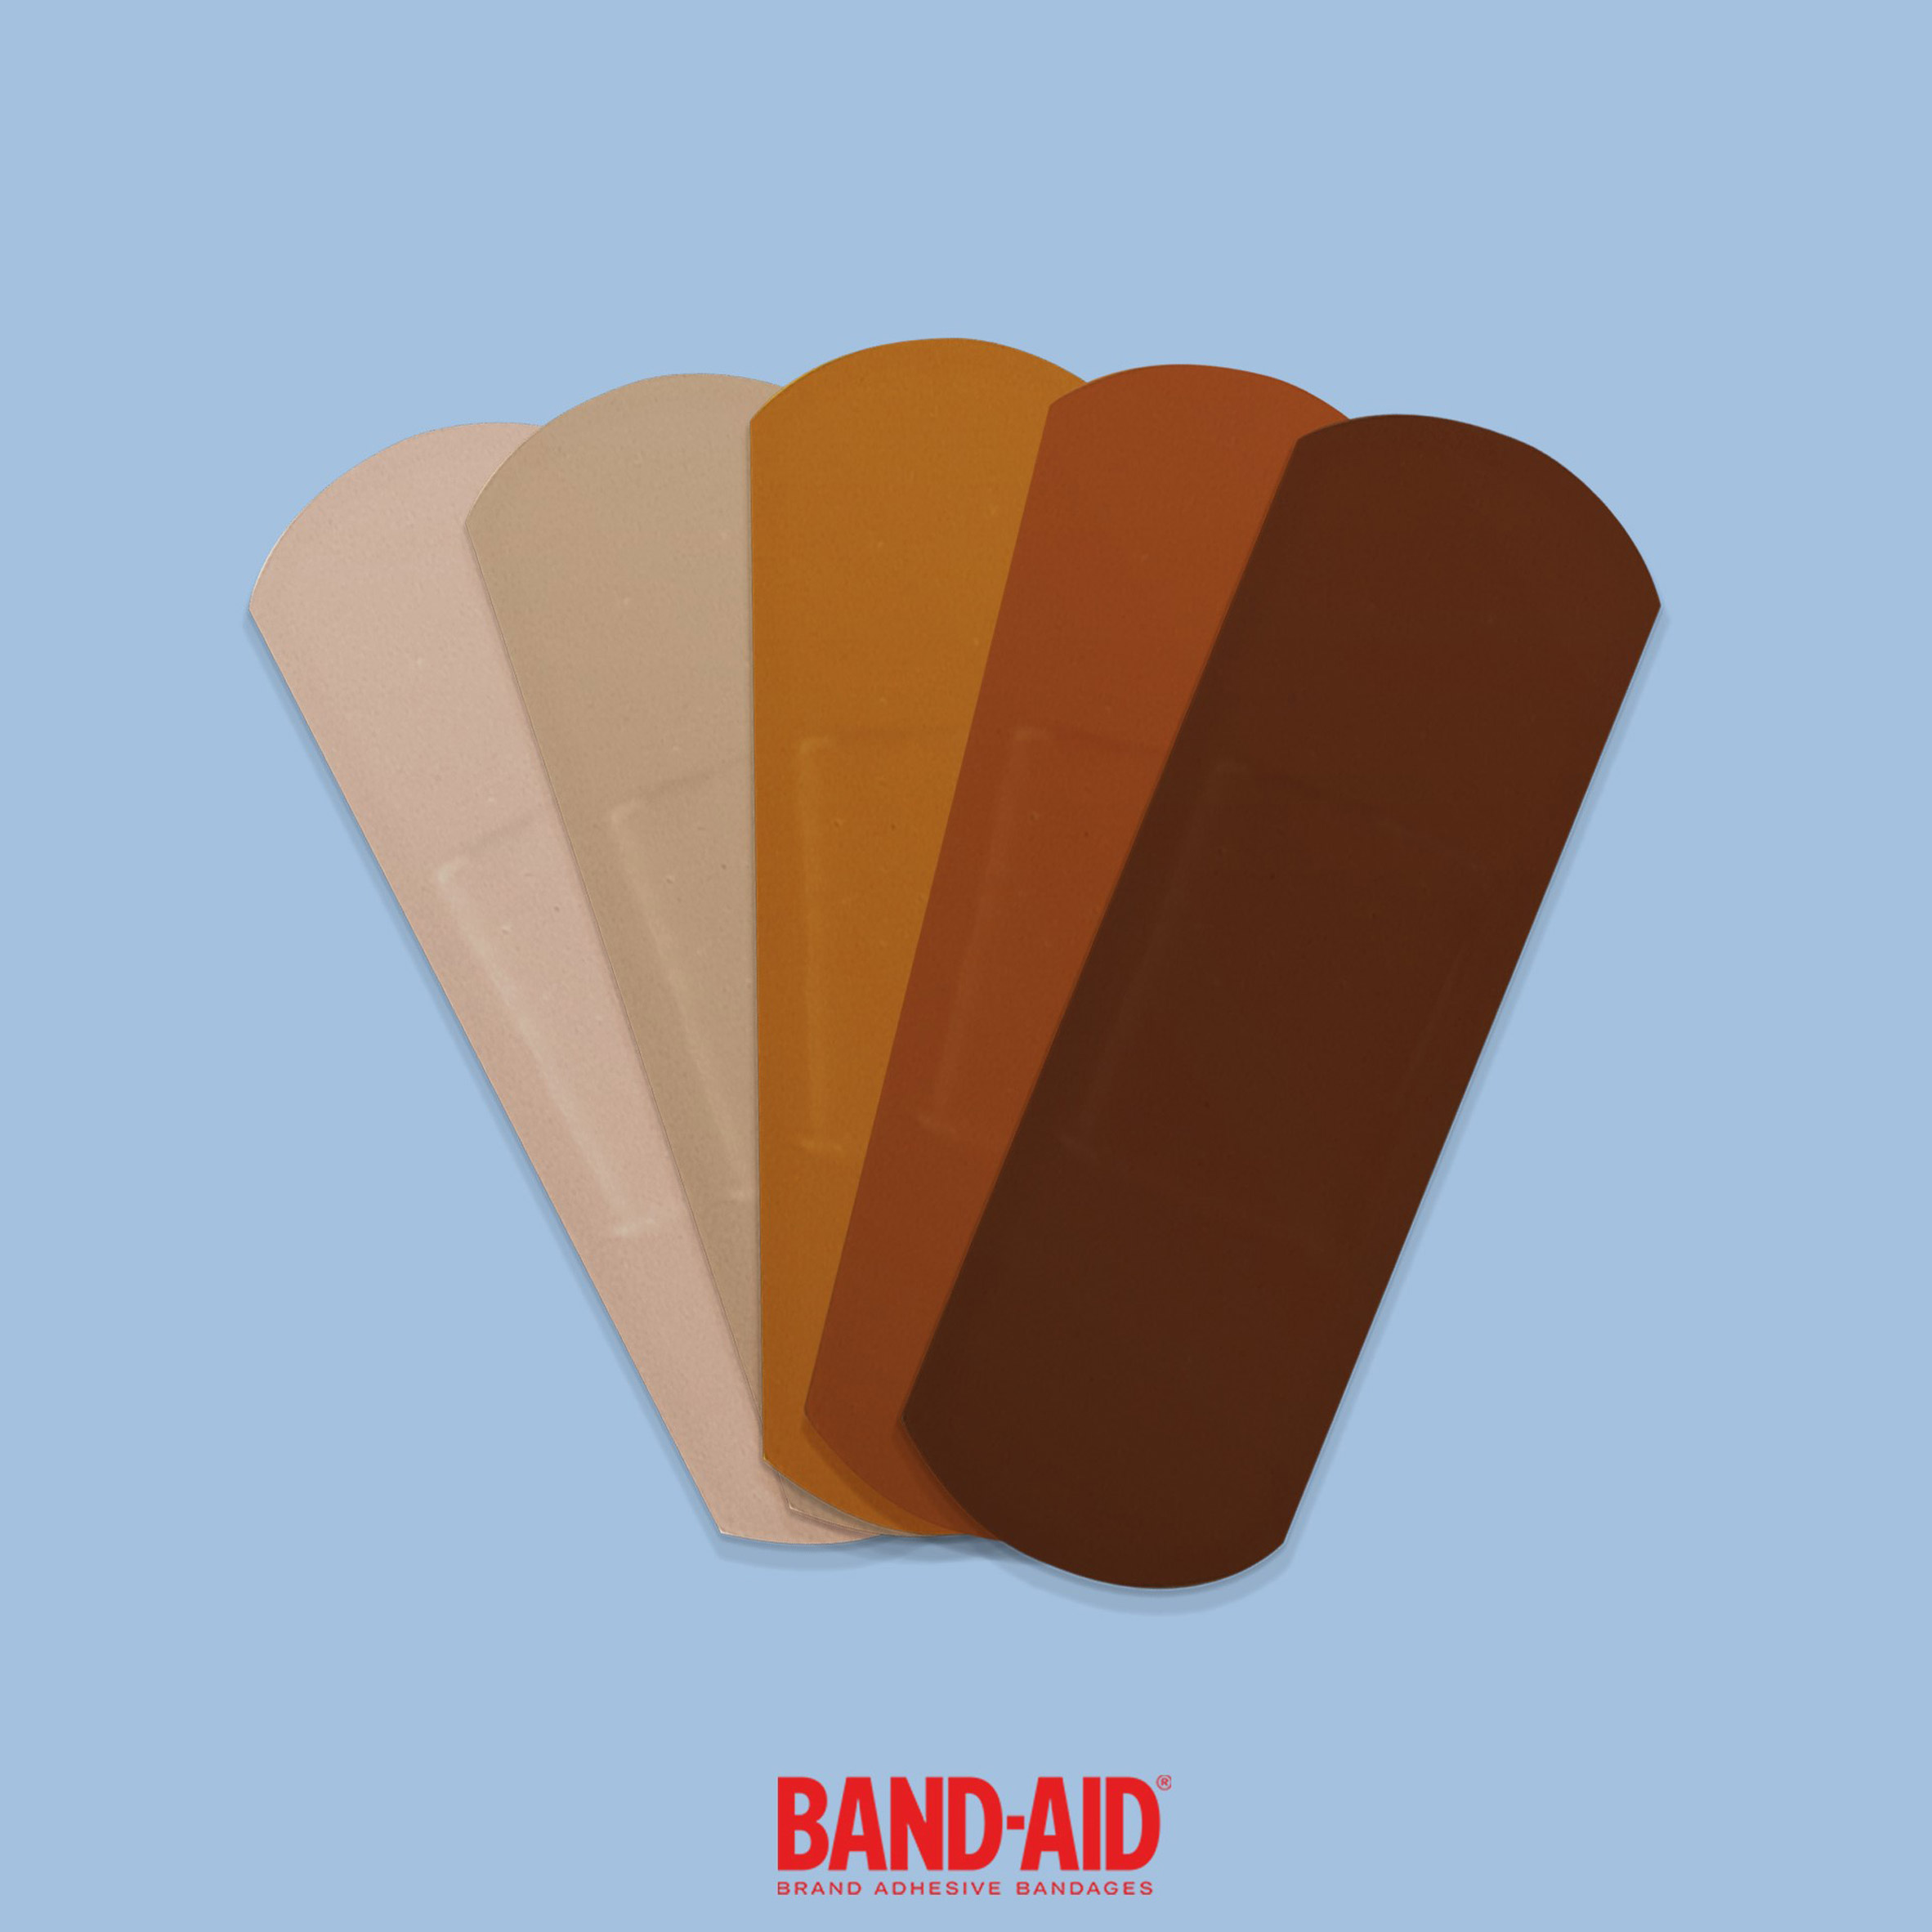 Band-Aid launches bandages to embrace the beauty of diverse skin